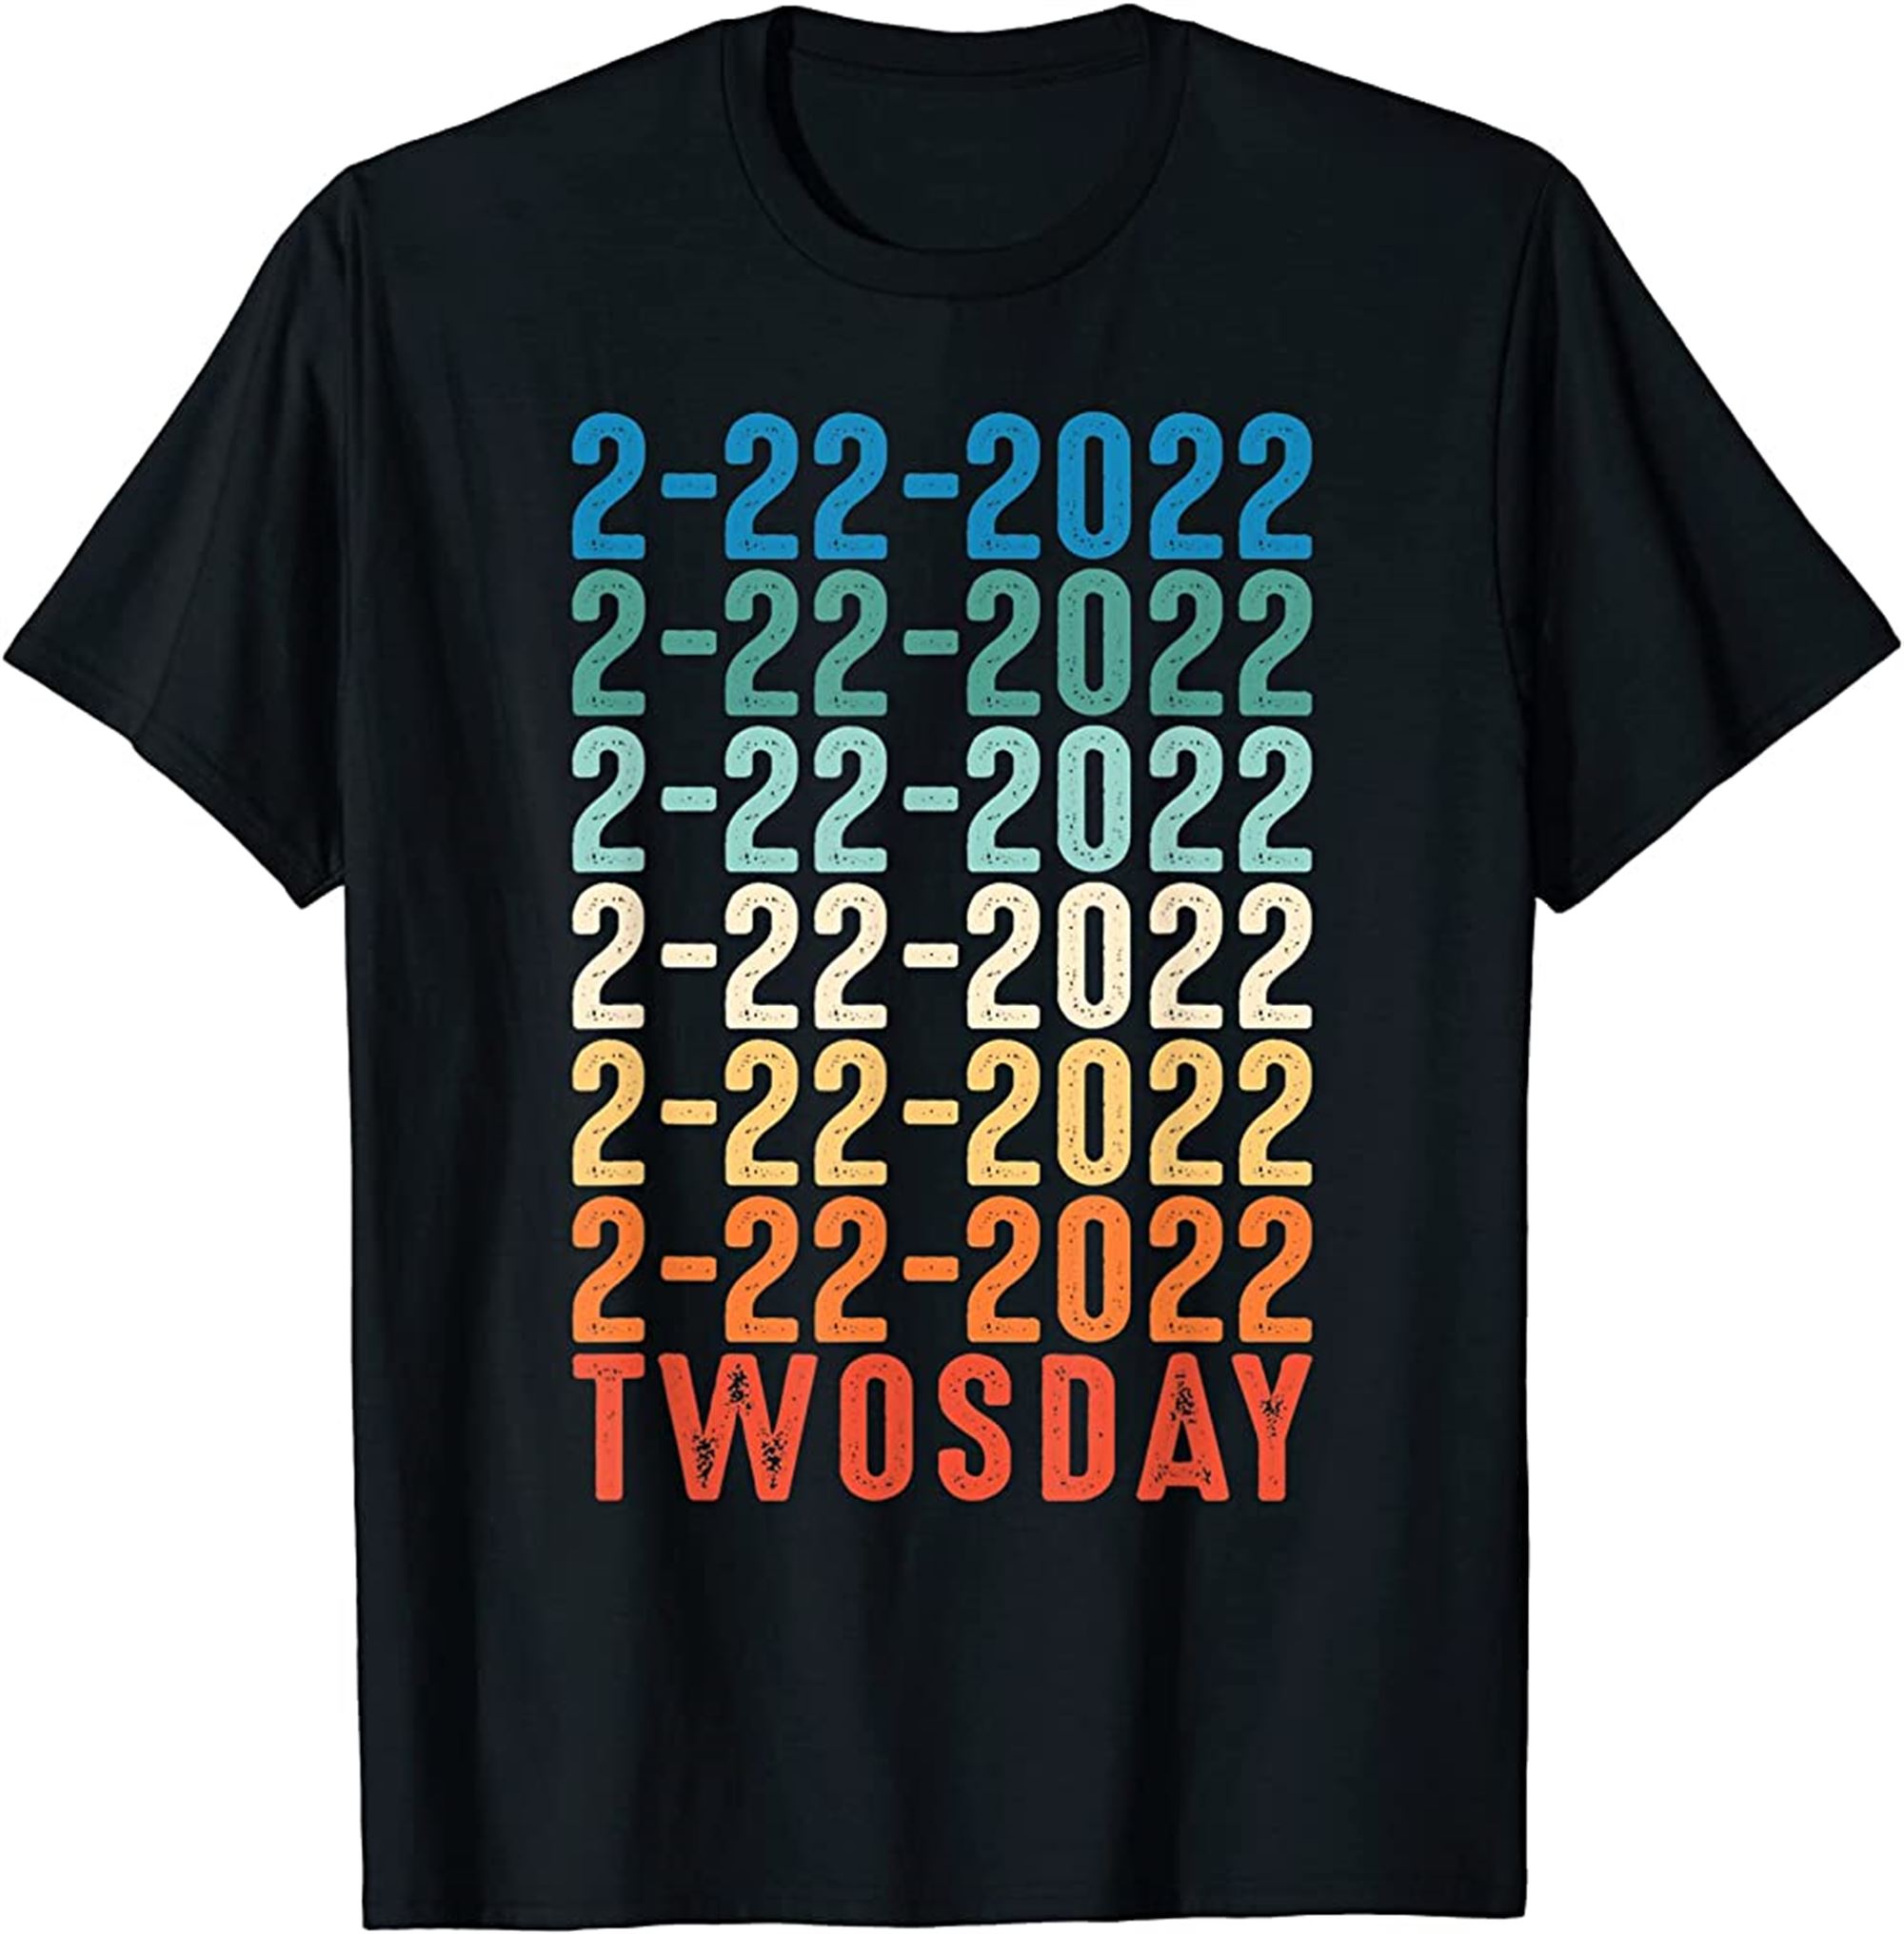 Vintage 2 22 22 Twosday Twos Day Funny February 22nd 2022 Tshirt Plus Size Up To 5xl